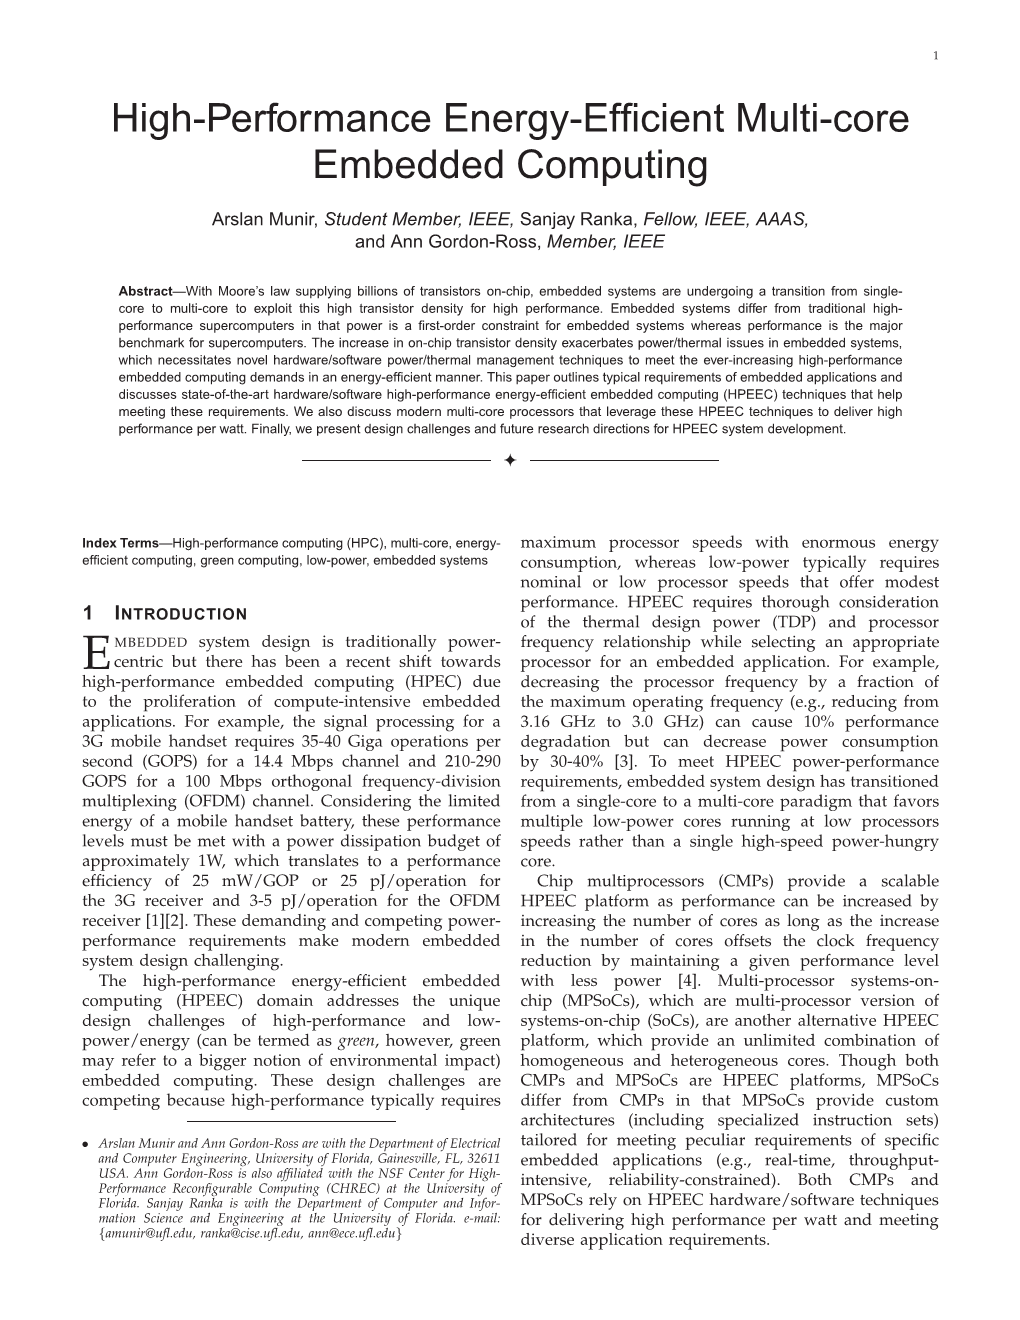 High-Performance Energy-Efficient Multi-Core Embedded Computing